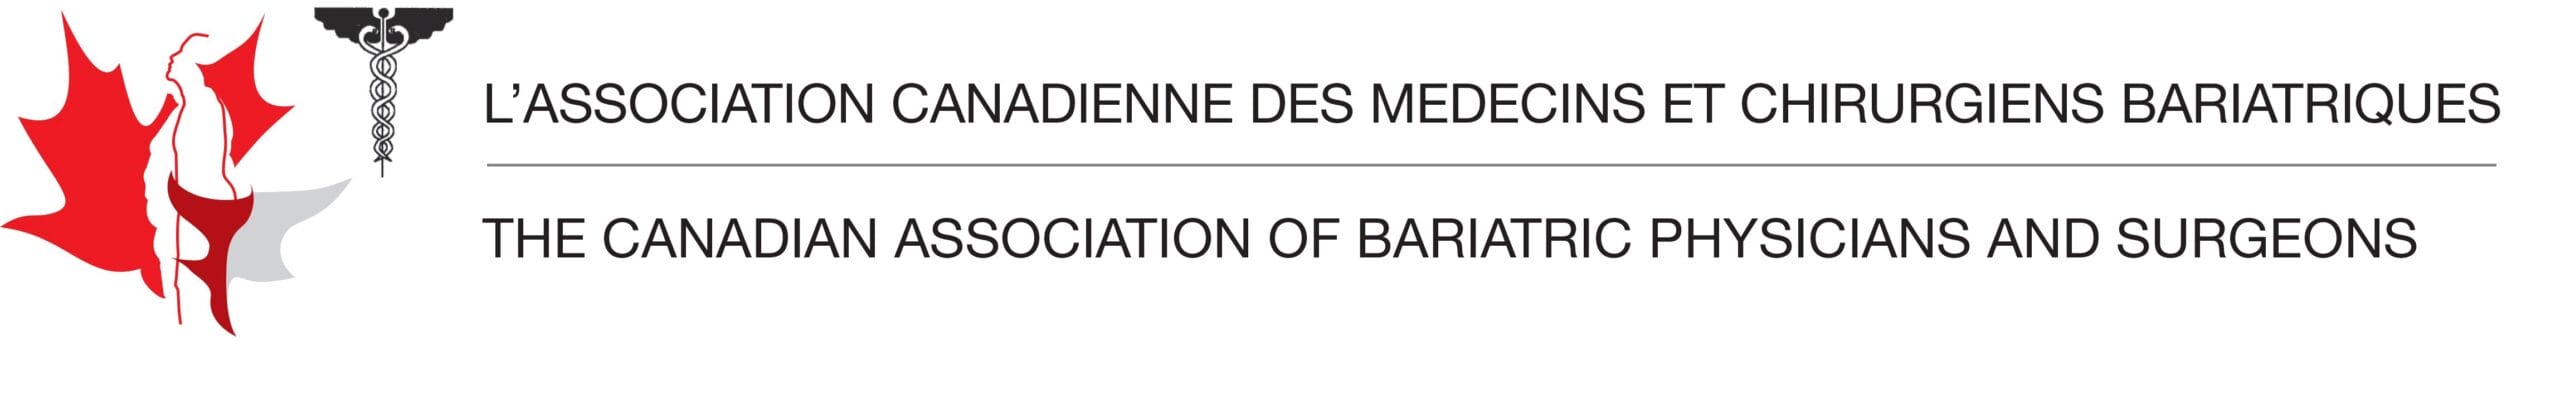 Logo of The Canadian Association of Bariatric Physicians and Surgeons with both French and English text, and a red and white graphic of Canada.